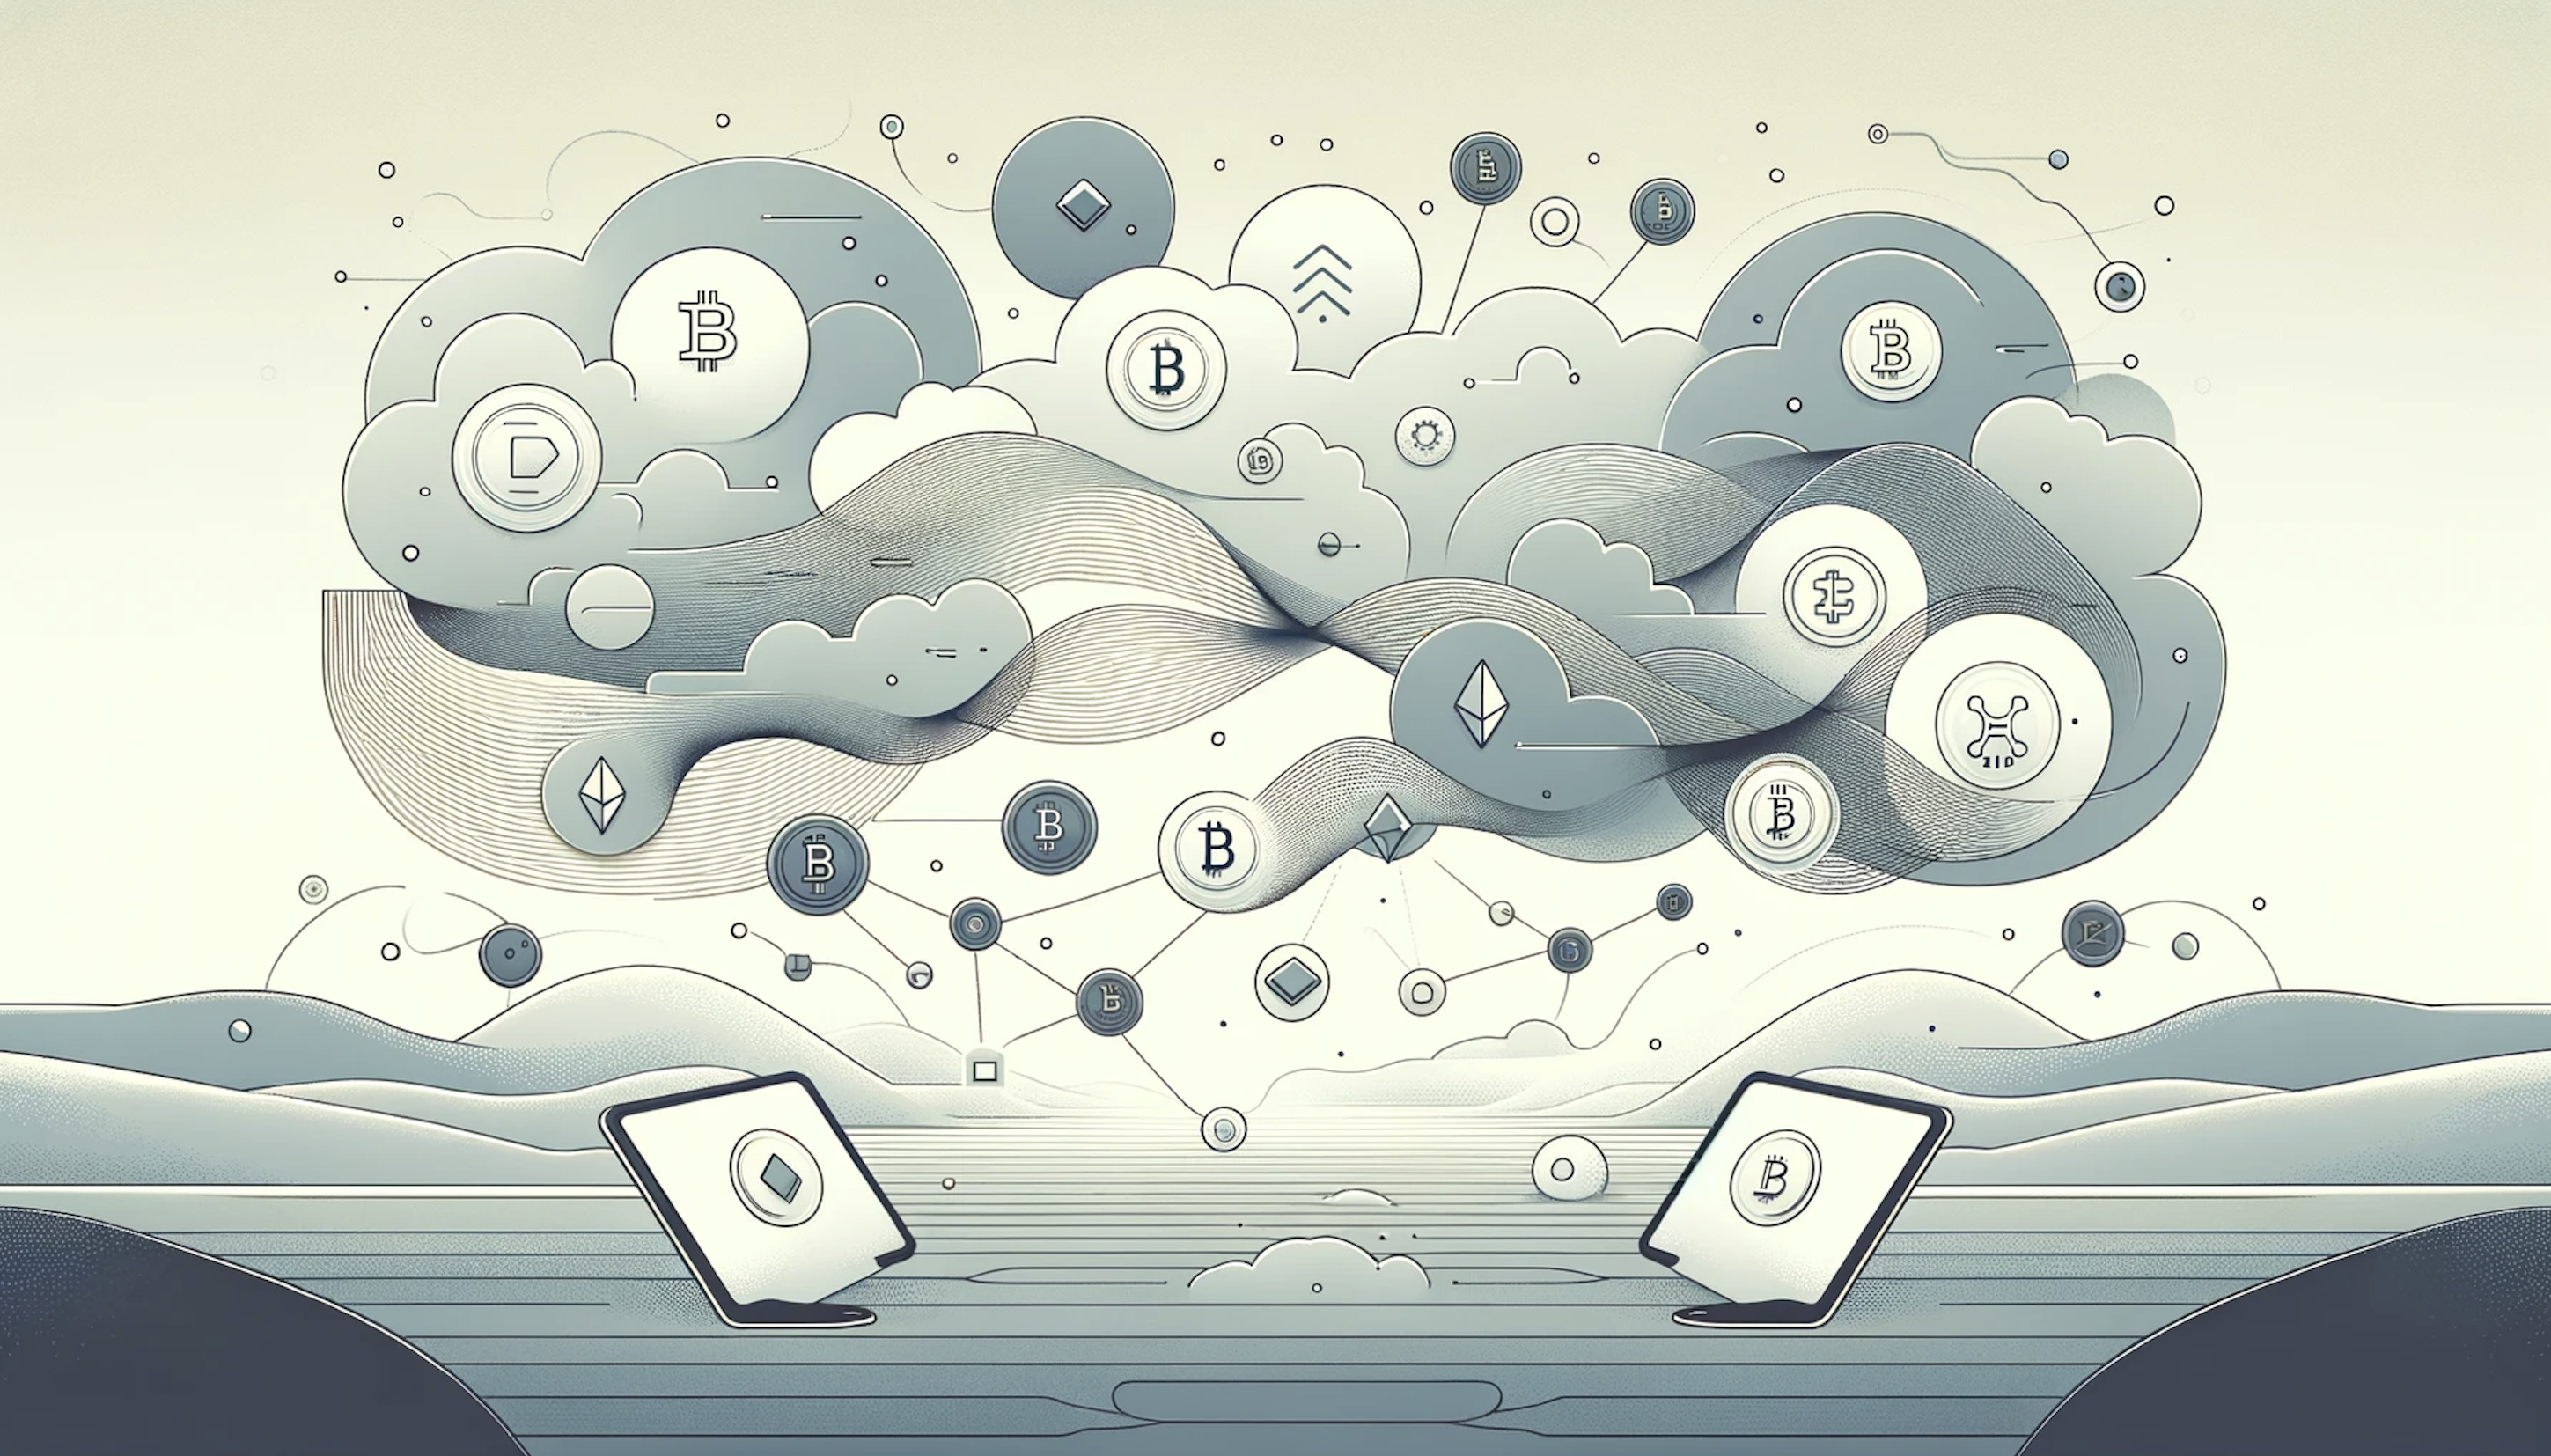 Graphic art illustration - Showing clouds and components of decentralized exchanges